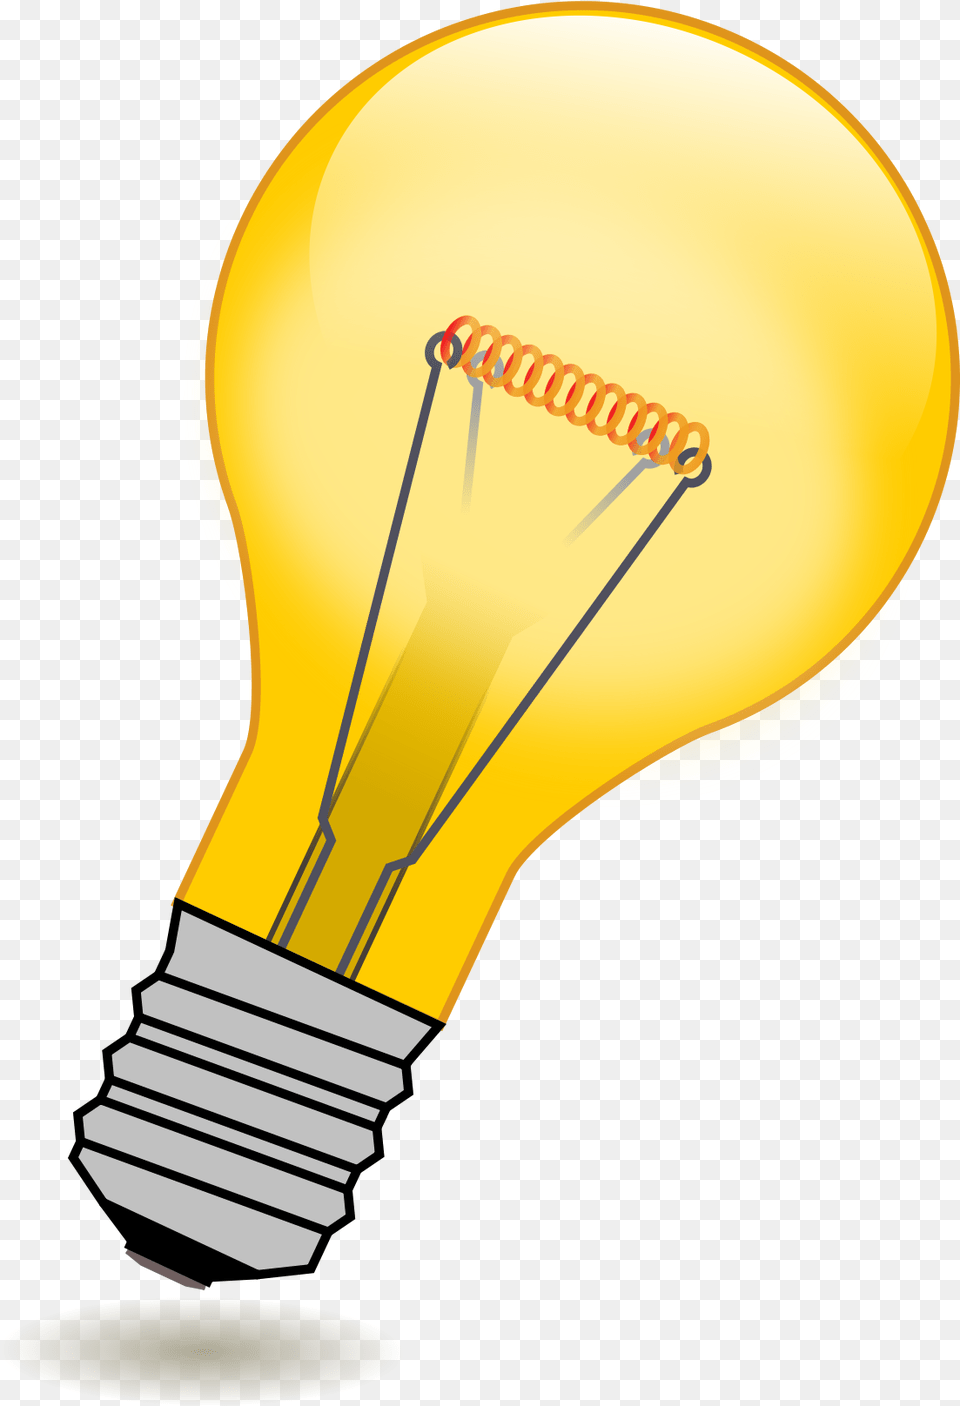 Filelight Bulb Icon Tipssvg Wikimedia Commons Light Bulb, Lightbulb Free Png Download